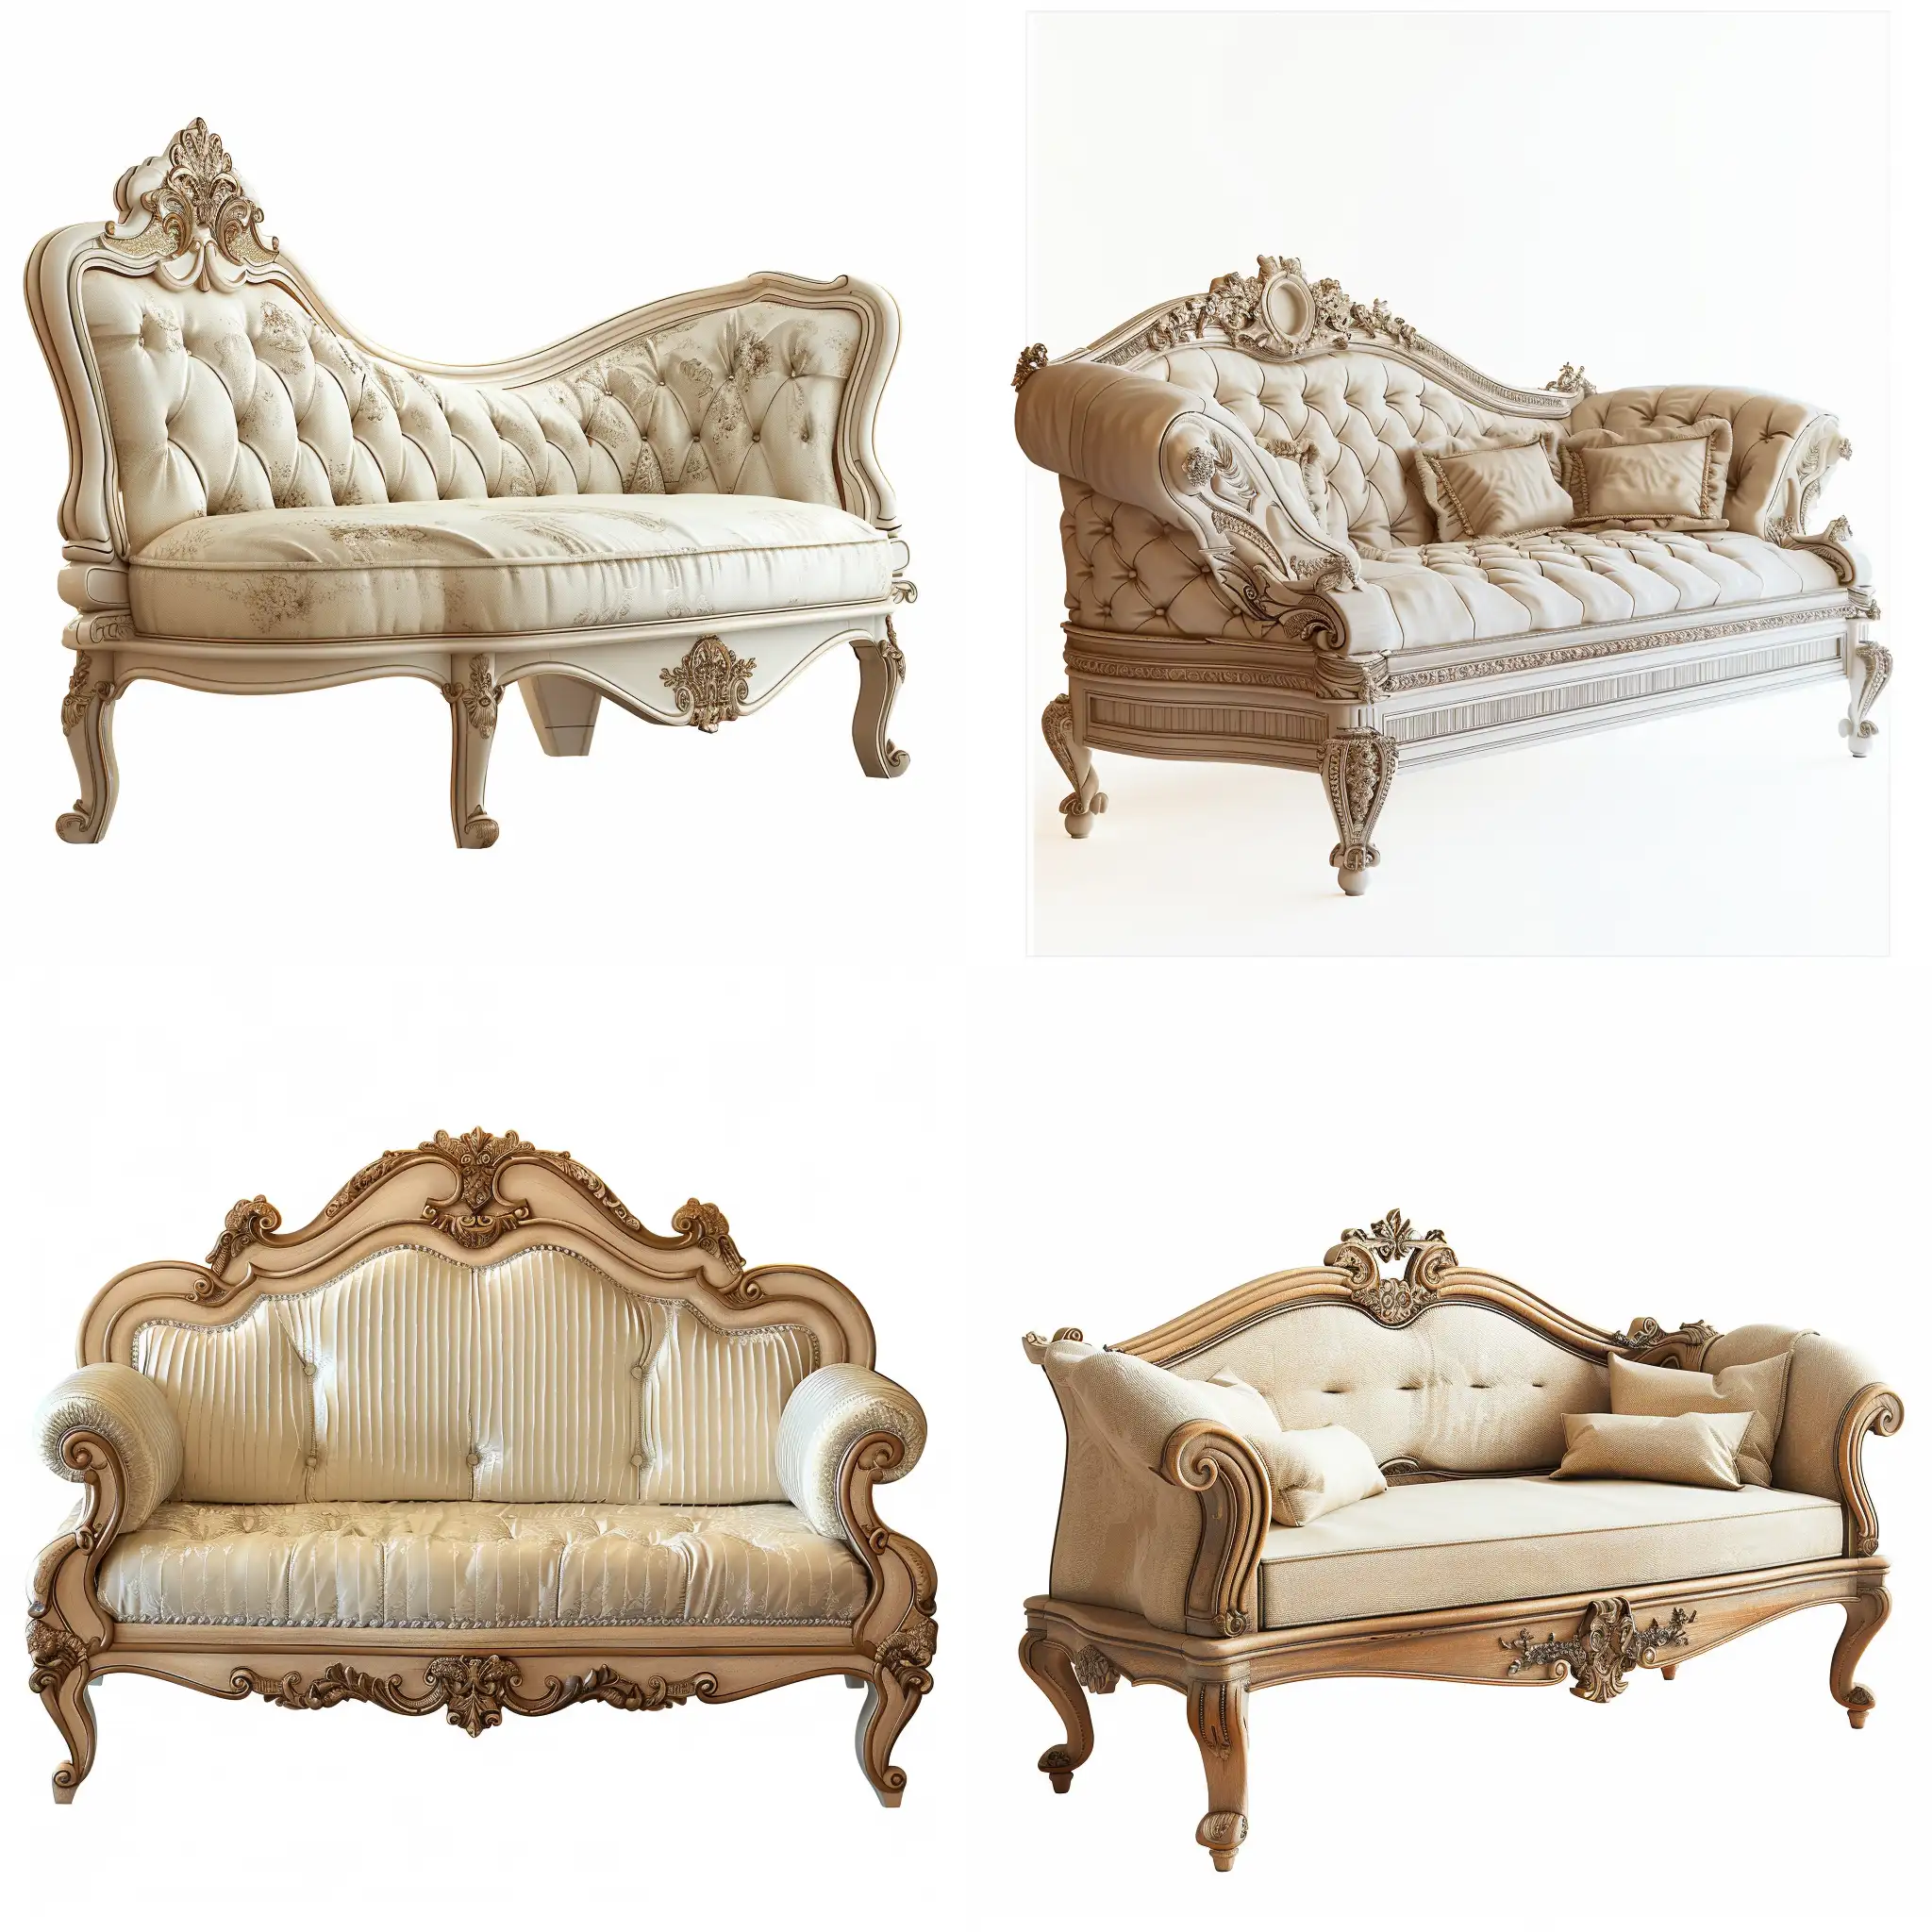 Elegant-FrenchStyle-Bed-with-Ornate-Carvings-and-Curved-Lines